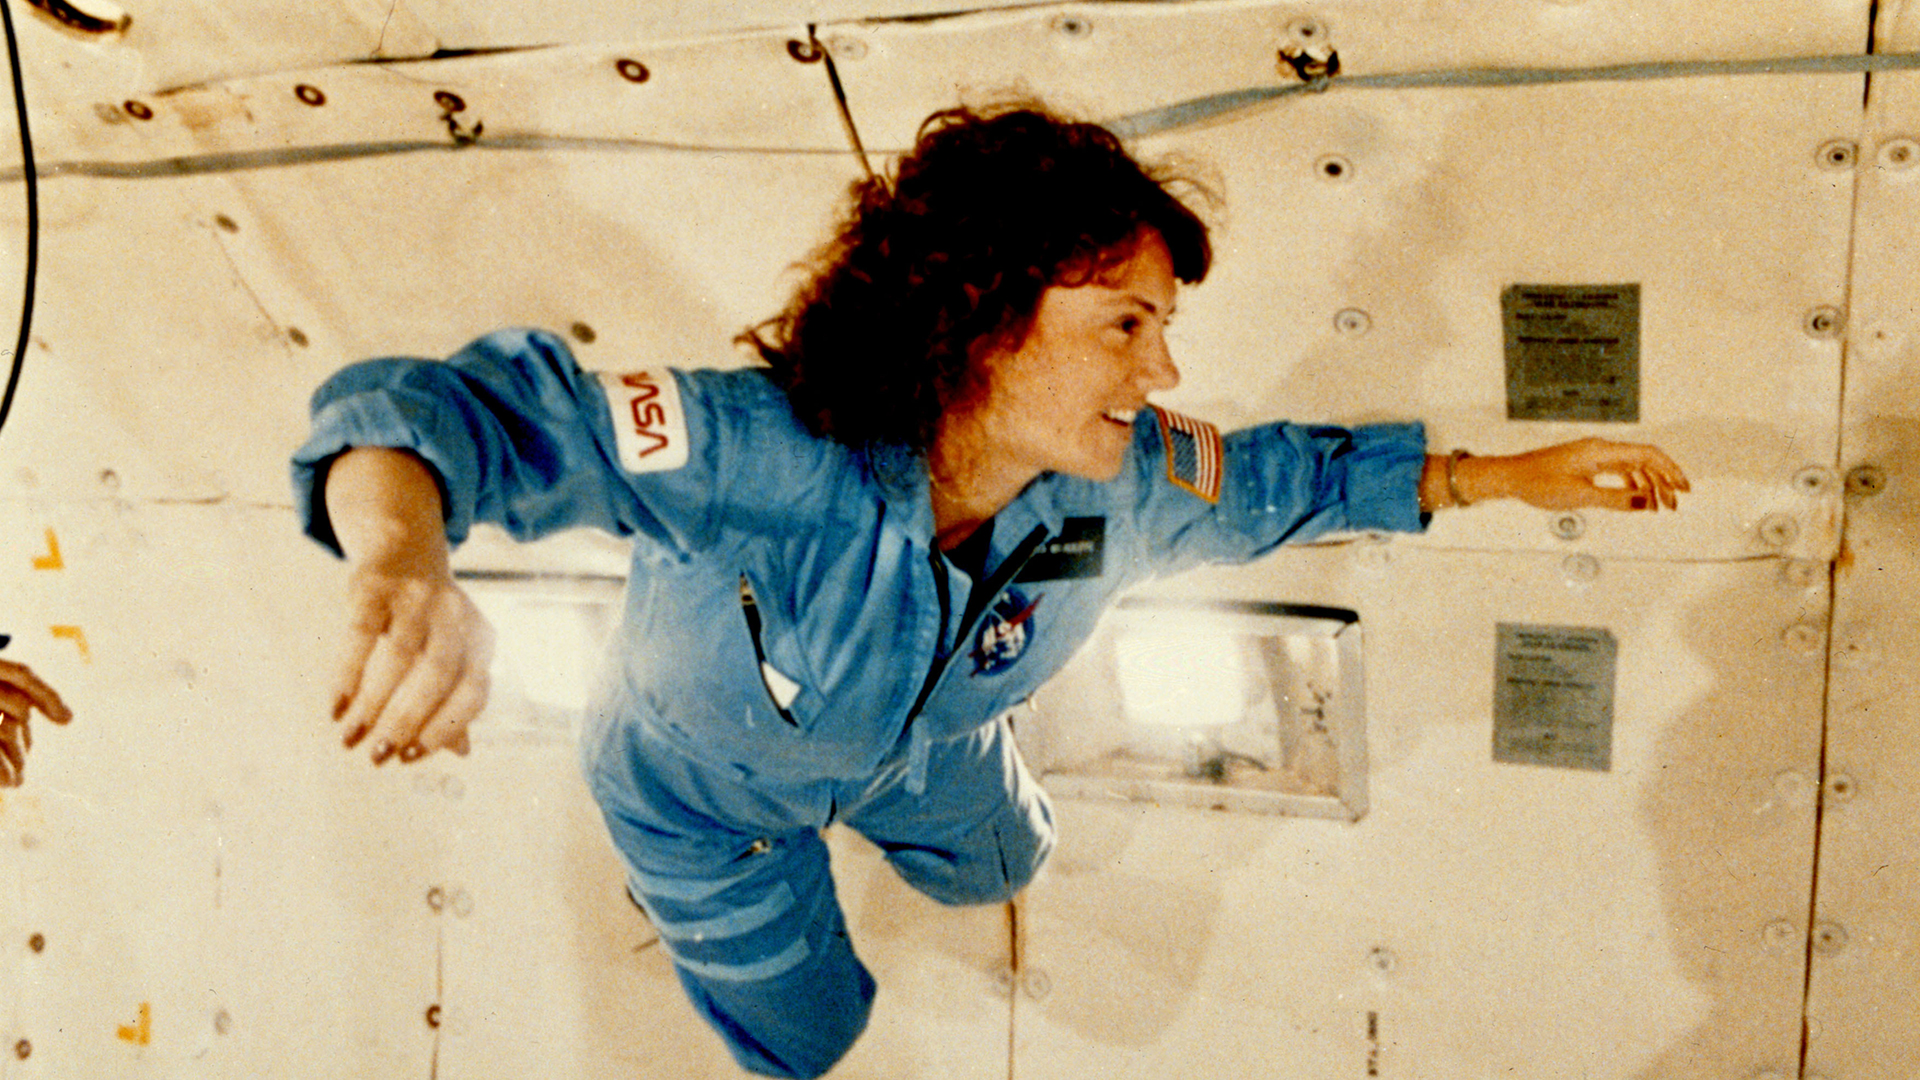 July 19, 1985: Christa McAuliffe Became the First American Civilian Selected to Travel Into Space